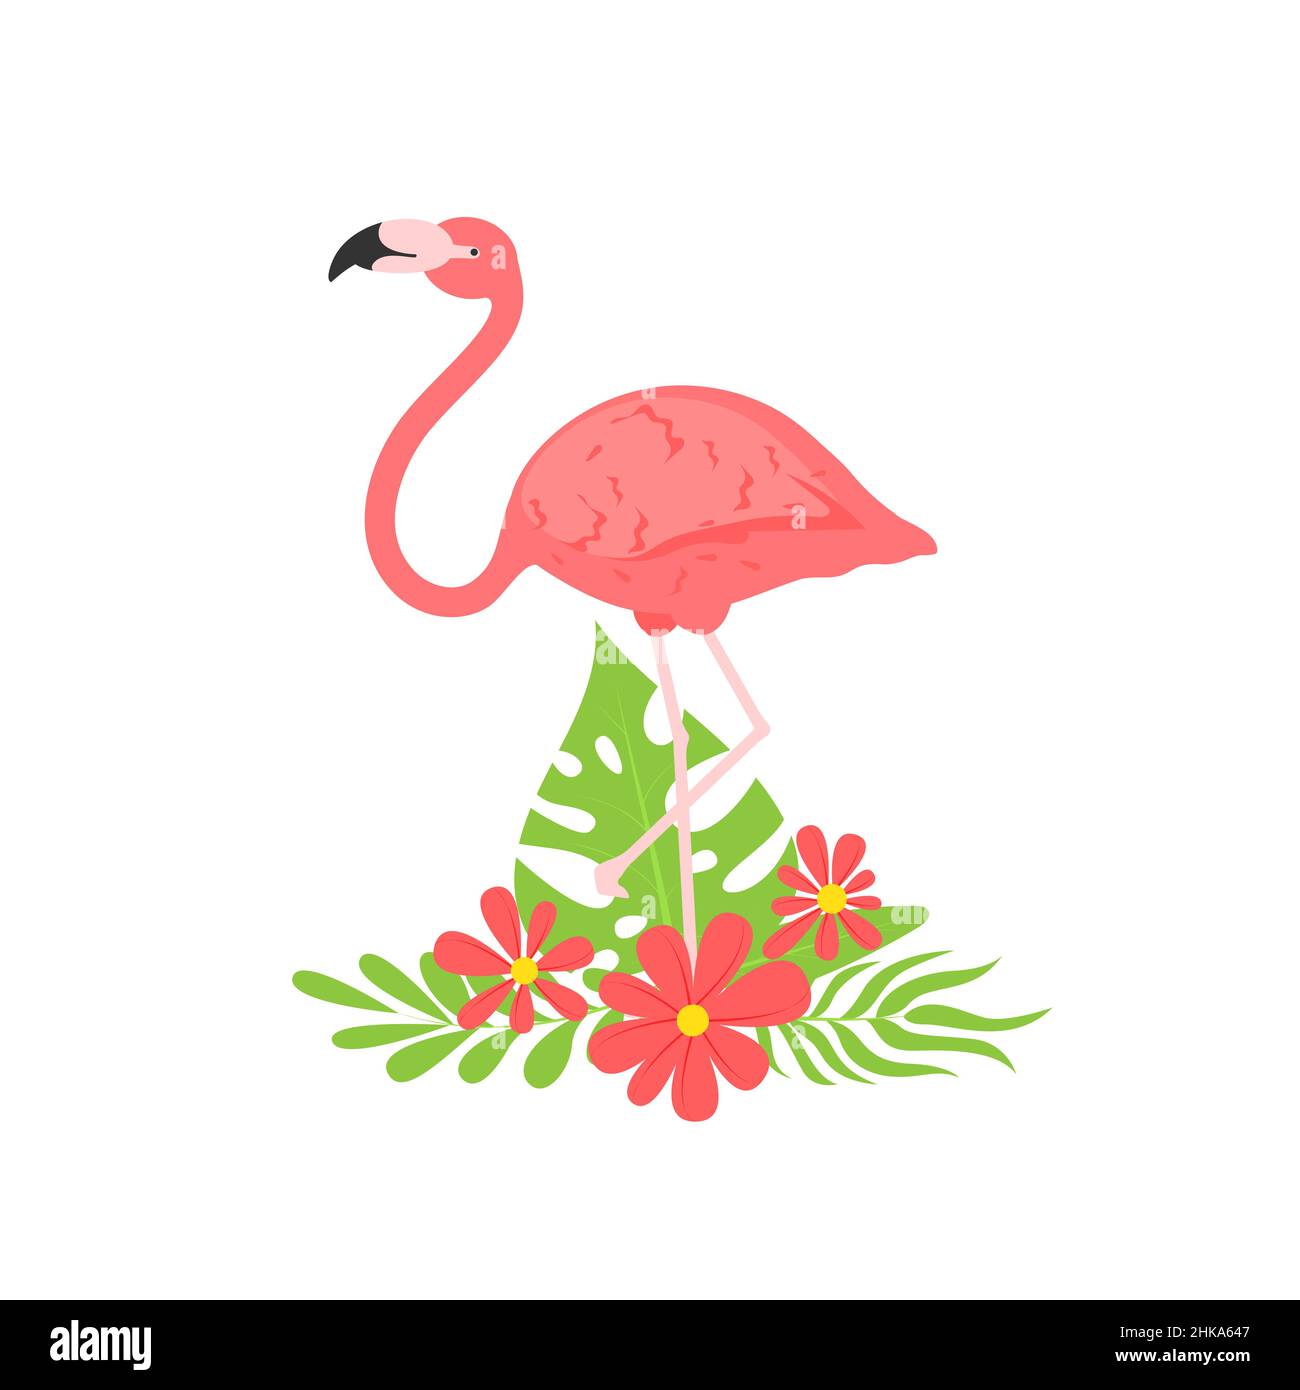 Vector illustration of a pink flamingo. Flamingo African tropical beauty of exotic animals. Sleek design simple. Isolated pink flamingo in flowers Stock Vector